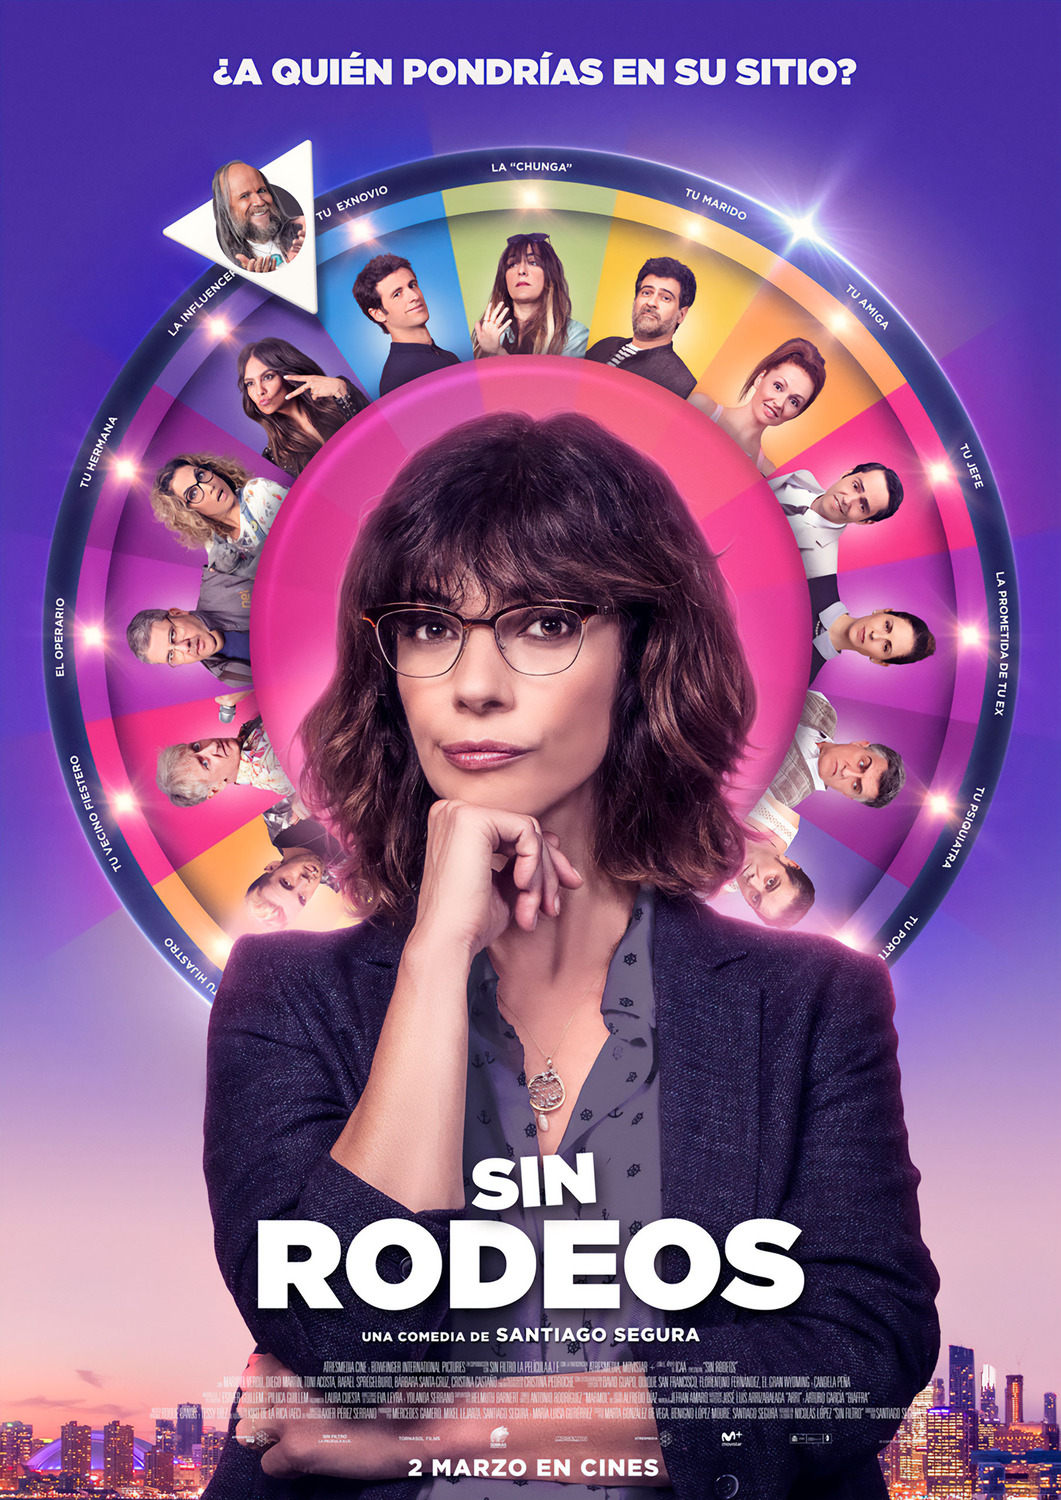 Extra Large Movie Poster Image for Sin rodeos 